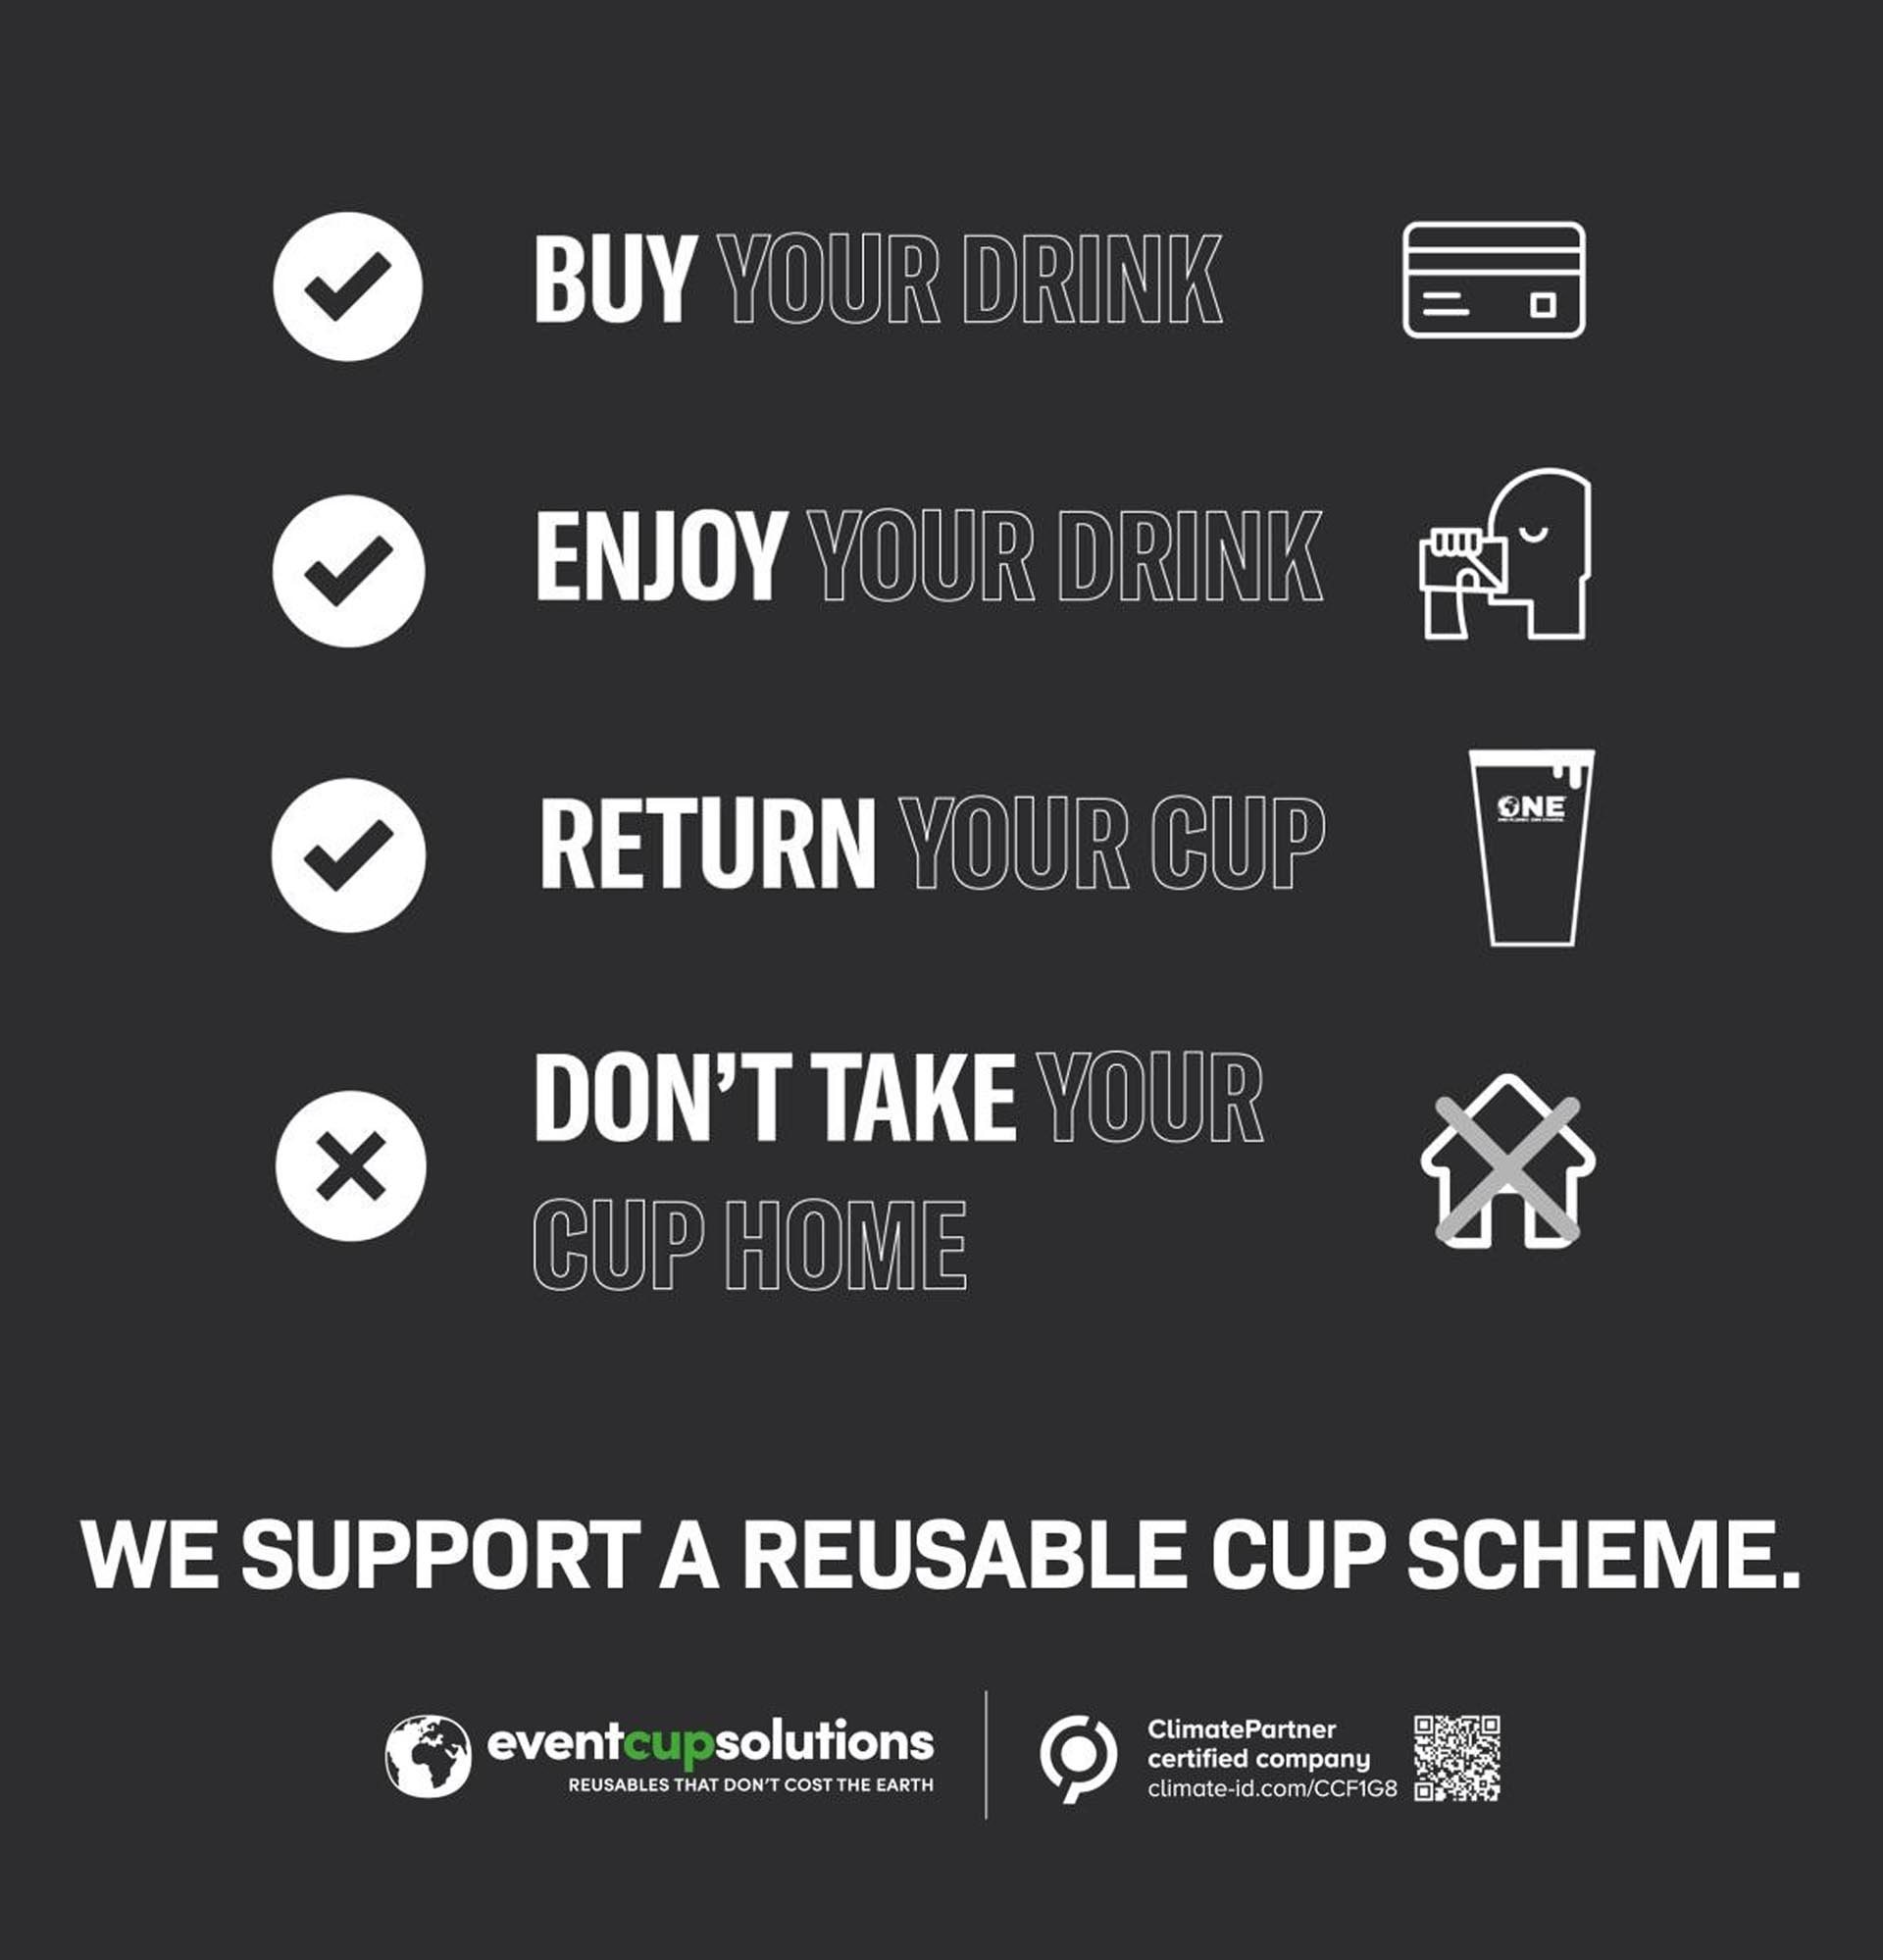 Re-Usable Cups infographic. 1. Buy Your Drink. 2. Enjoy Your Drink. 3. Return your cup. 4. Don't take your Cup Home. We support a reusable cup scheme. 